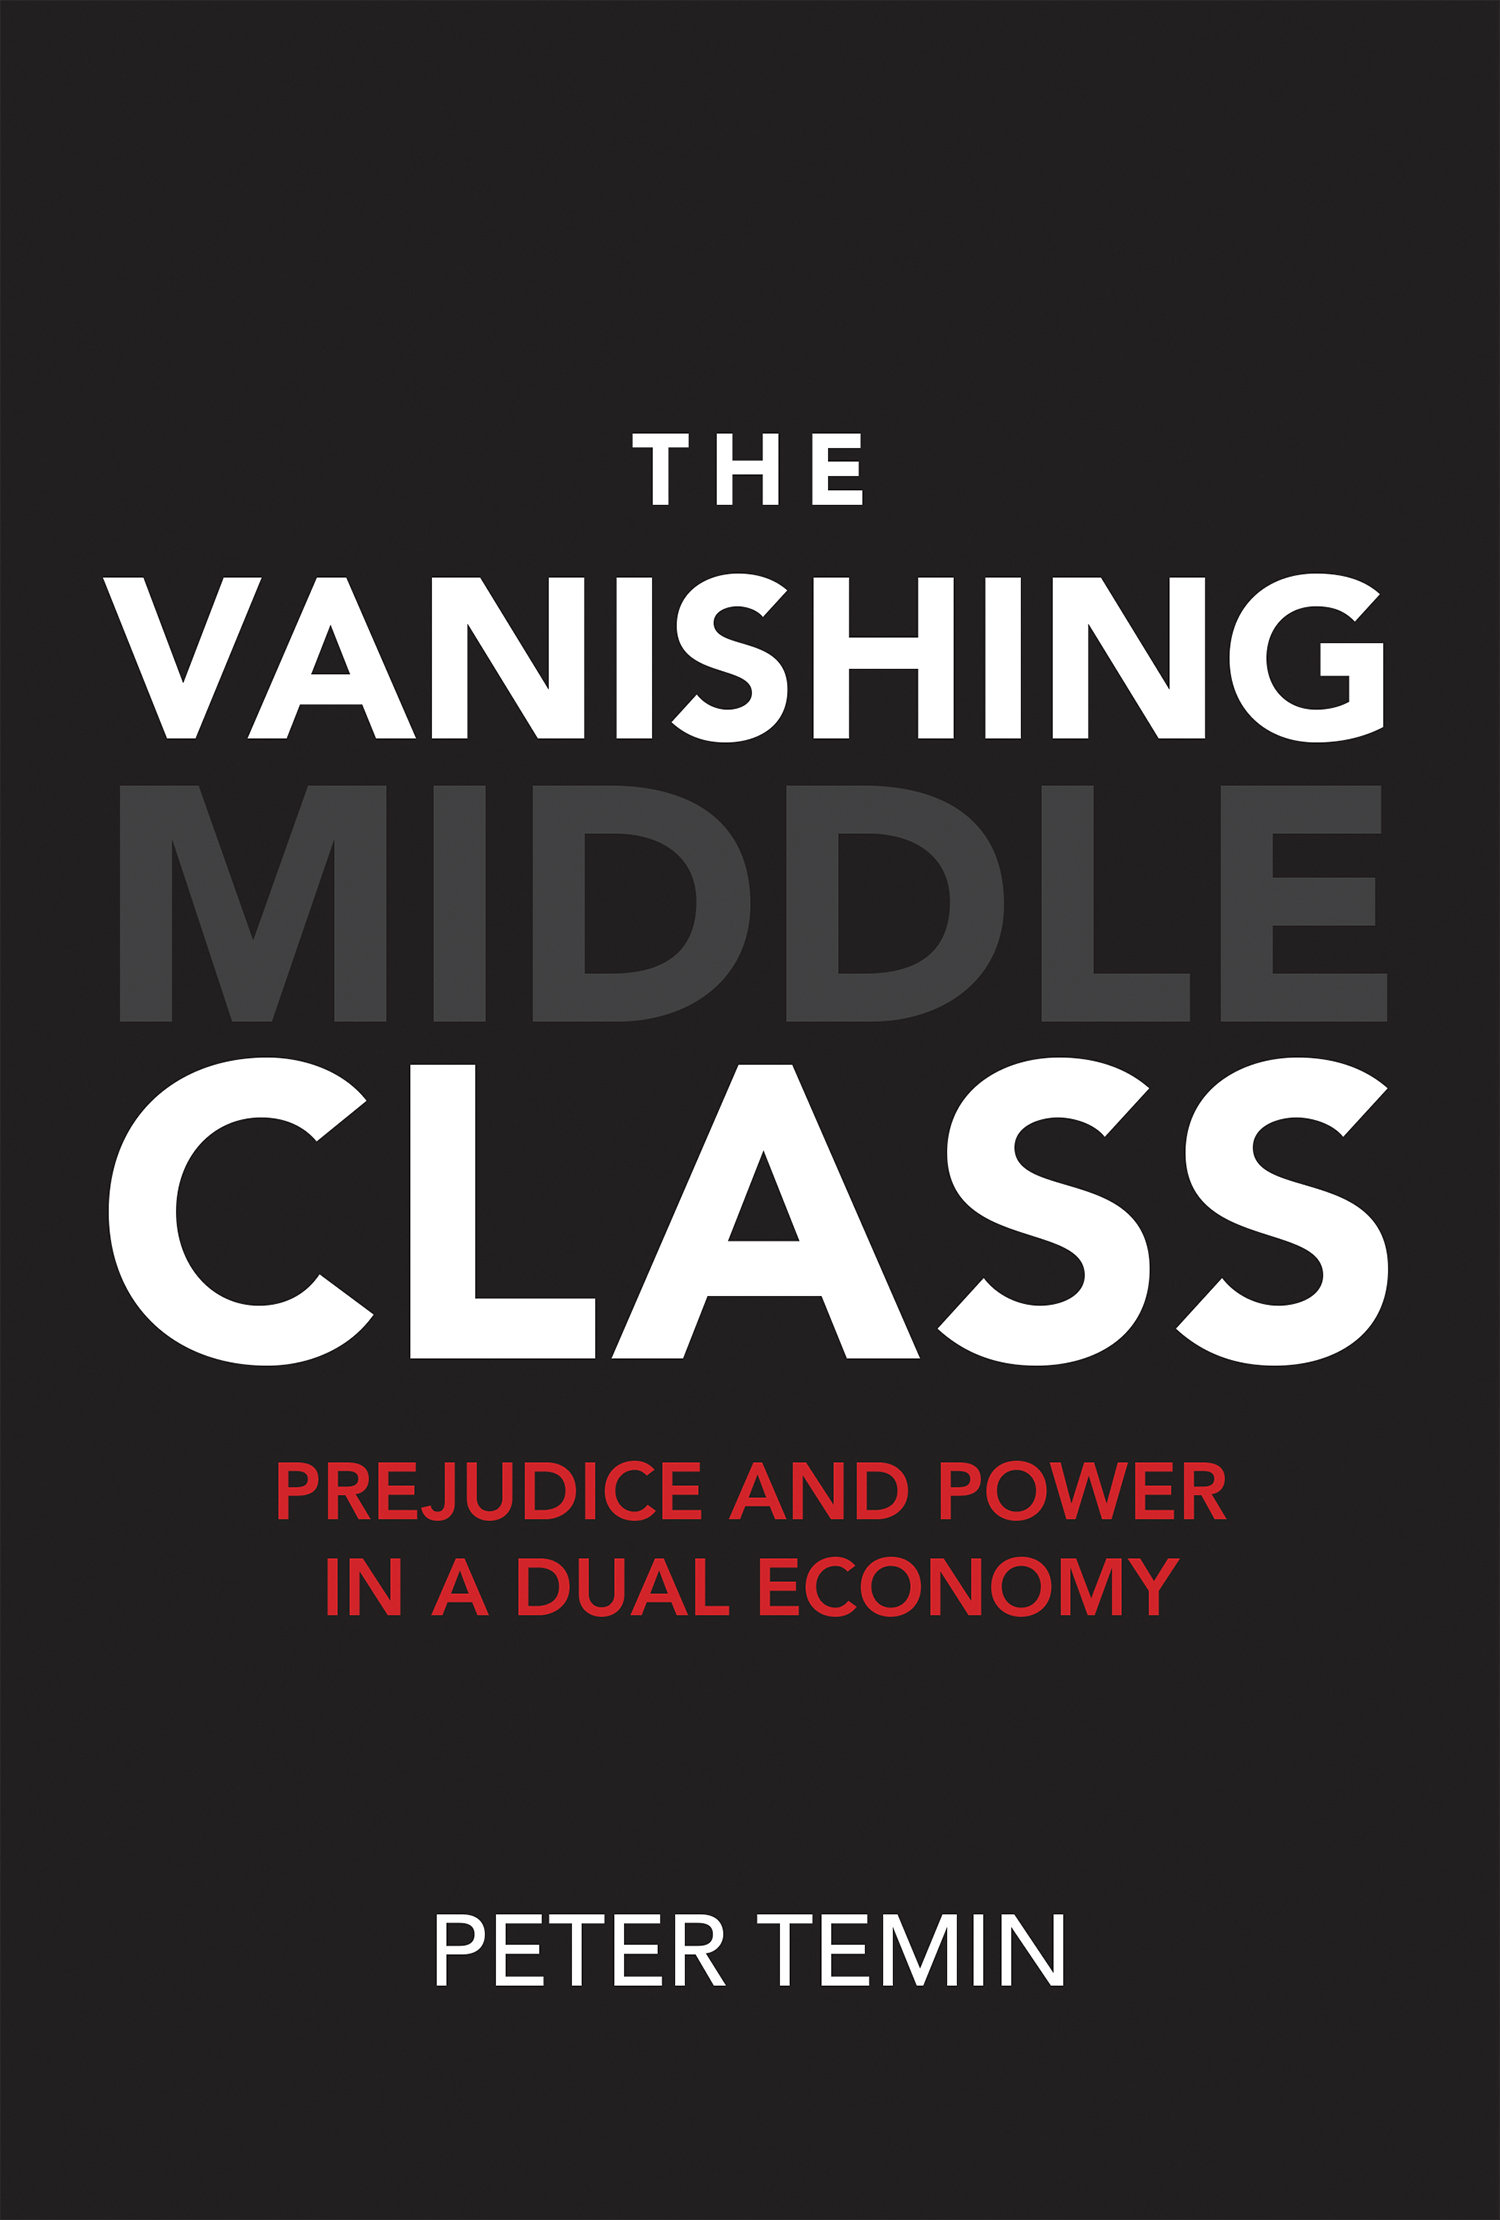 Book cover of The Vanishing Middle Class, by Peter Temin